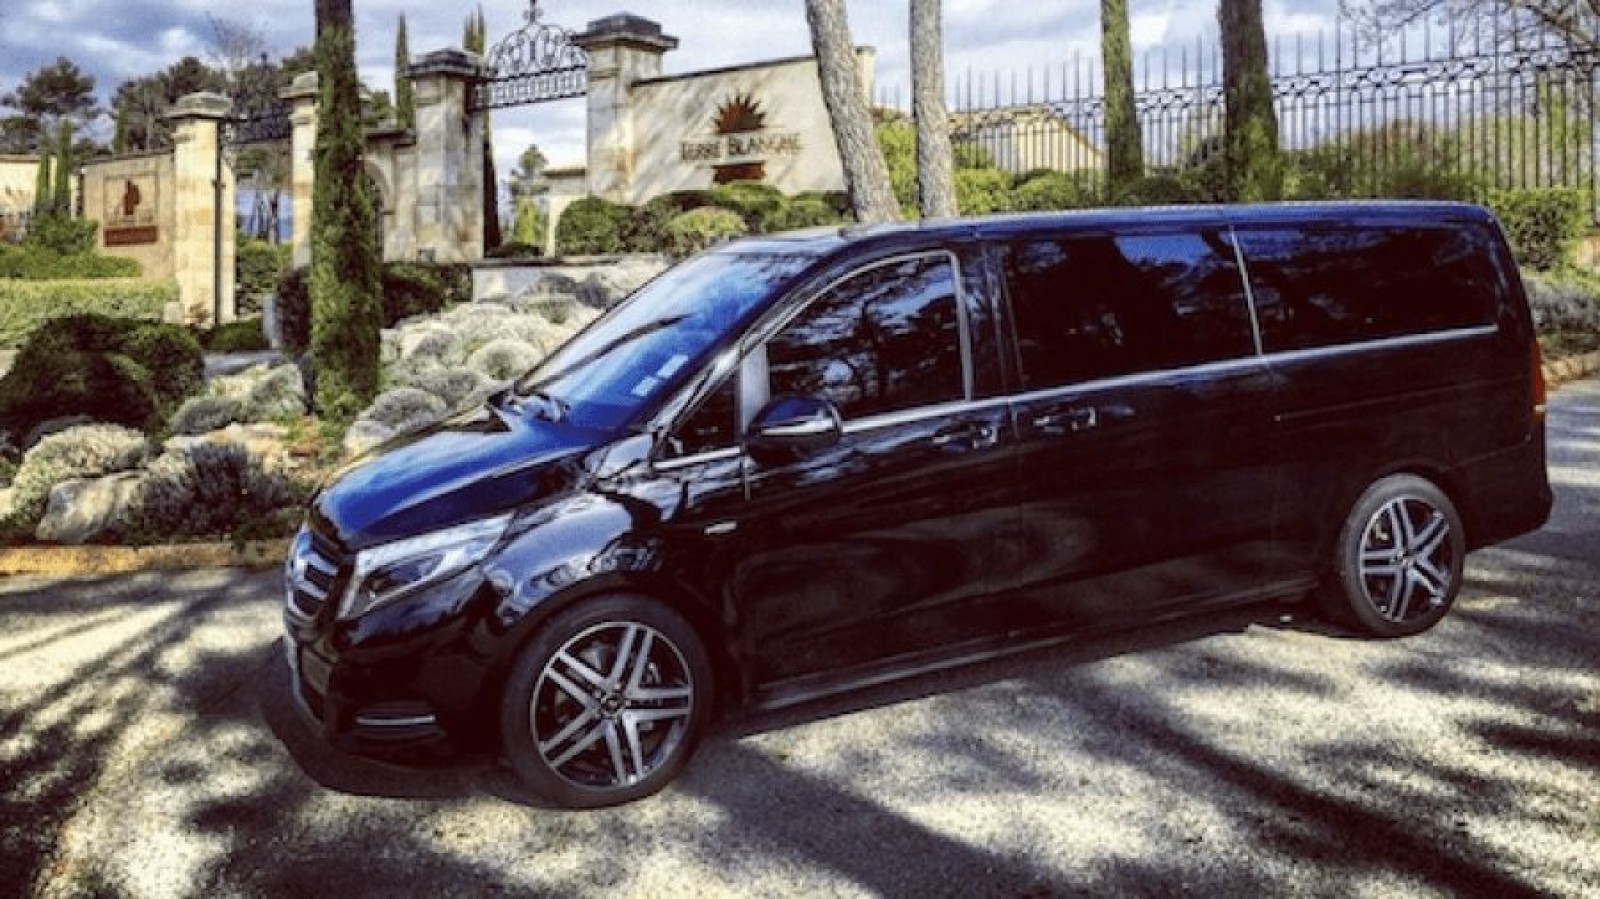 Private Chauffeur in Megève - Premium Vehicles & Services - Reactivity 24/7 - Ruby Services - Car Rental with Driver in Megève